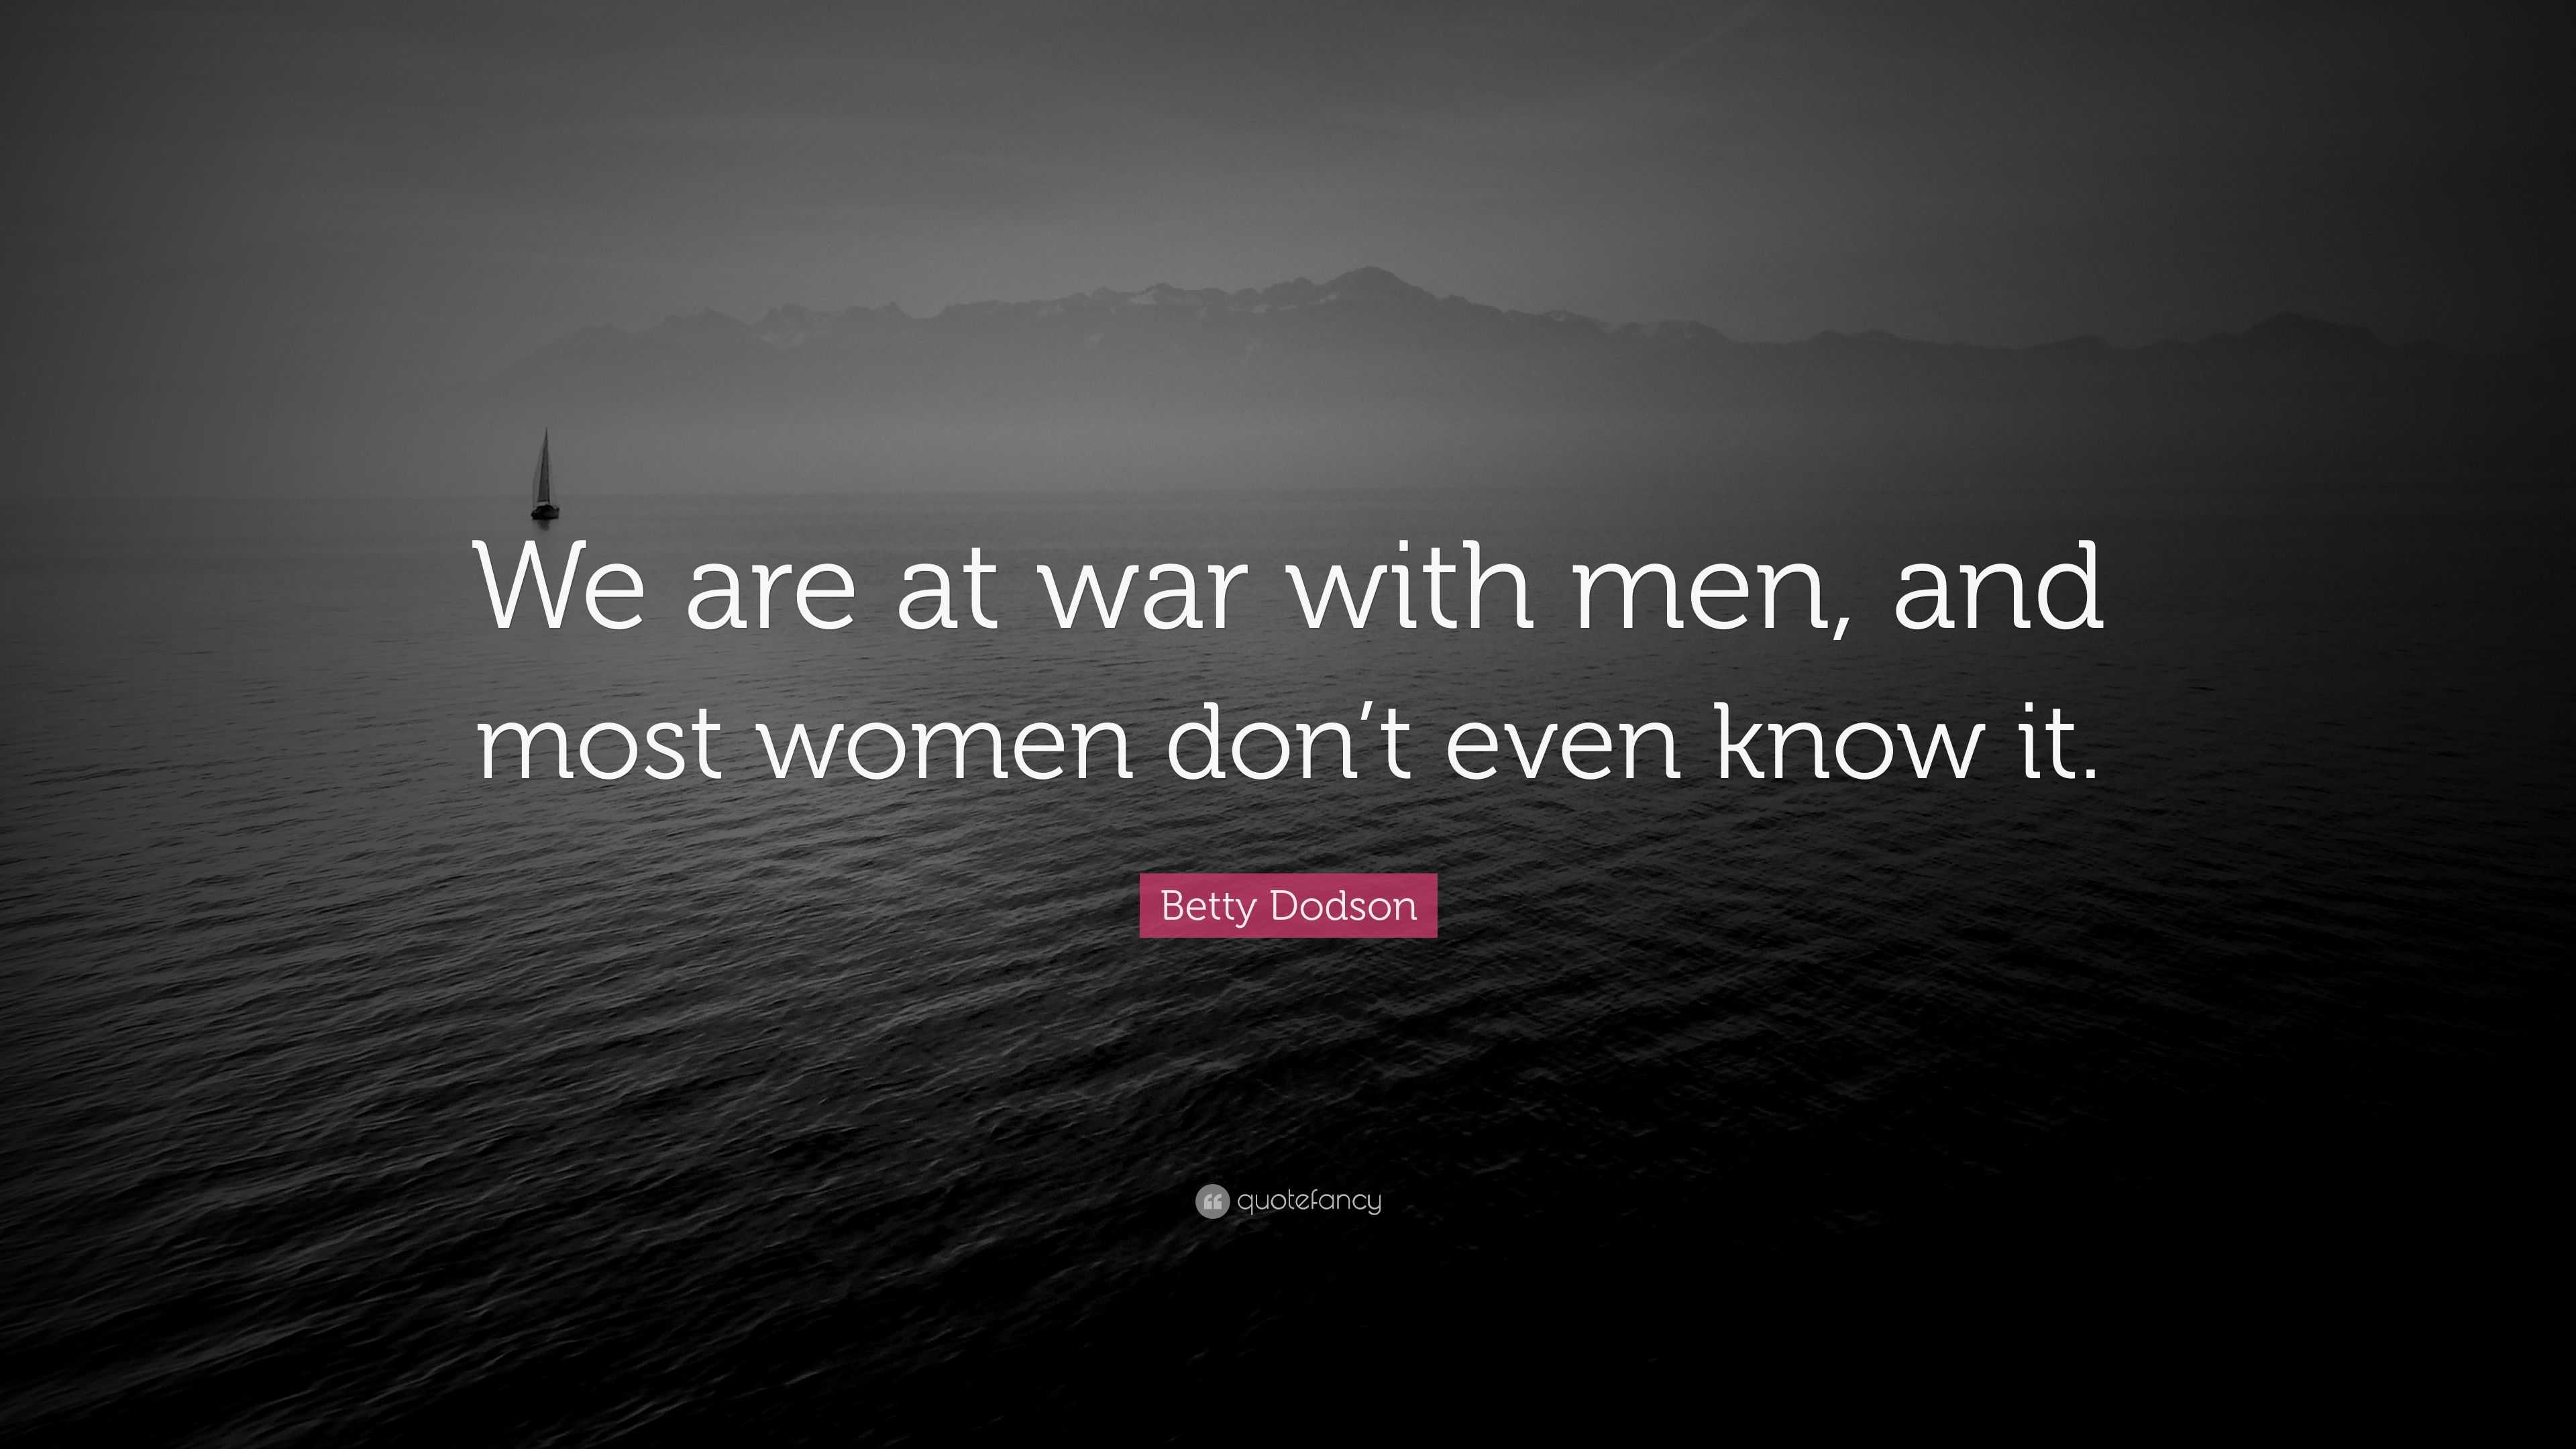 Betty Dodson Quote “we Are At War With Men And Most Women Dont Even